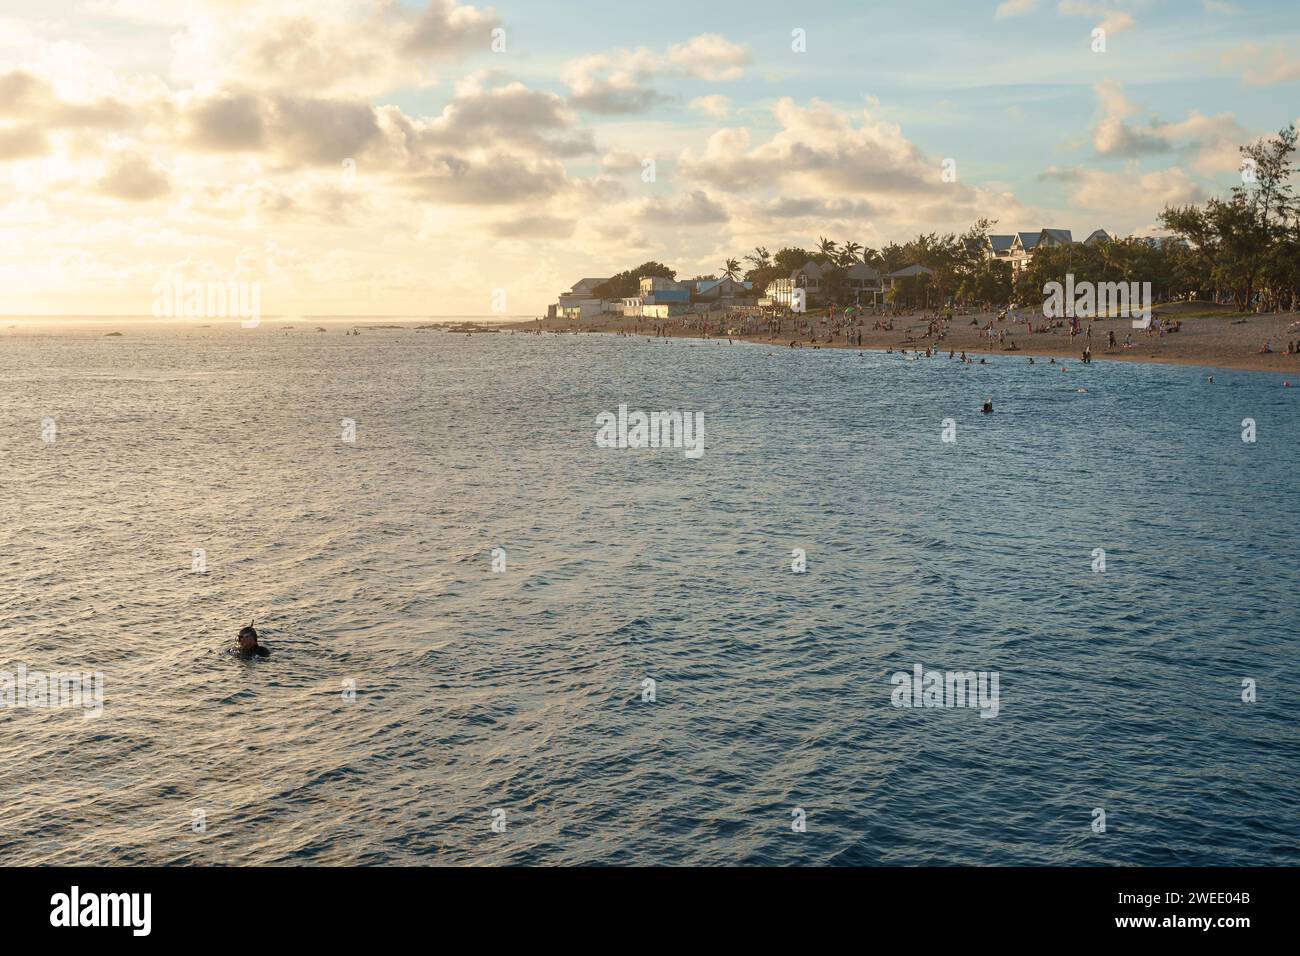 People snorkelling and swimming in the lagoon of Saint-Pierre, Reunion Island, at sunset. Stock Photo